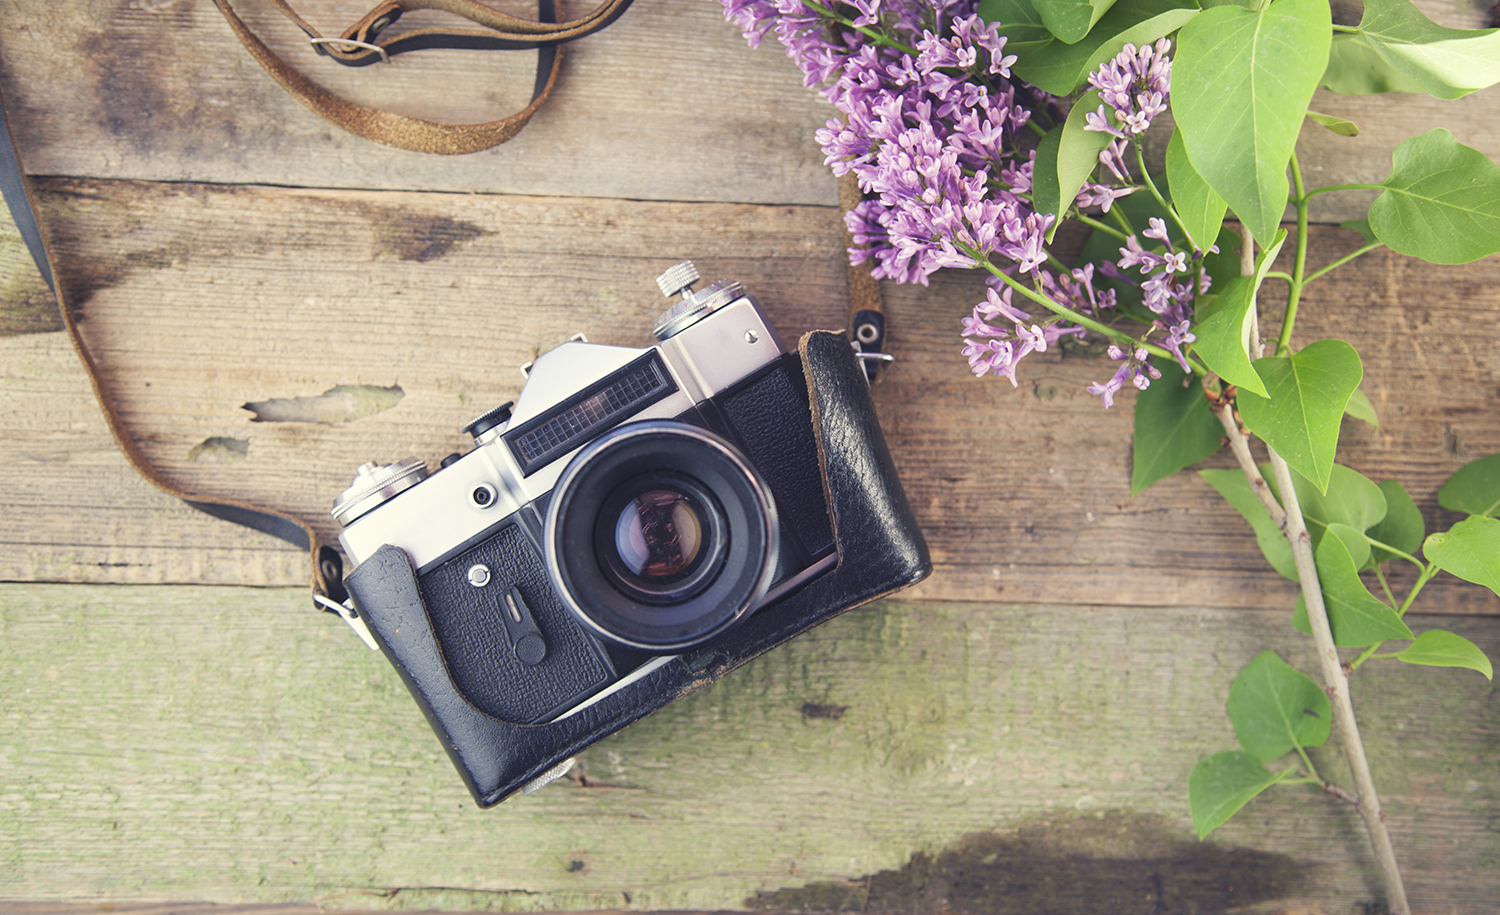 Camera on a wooden table with purple flowers